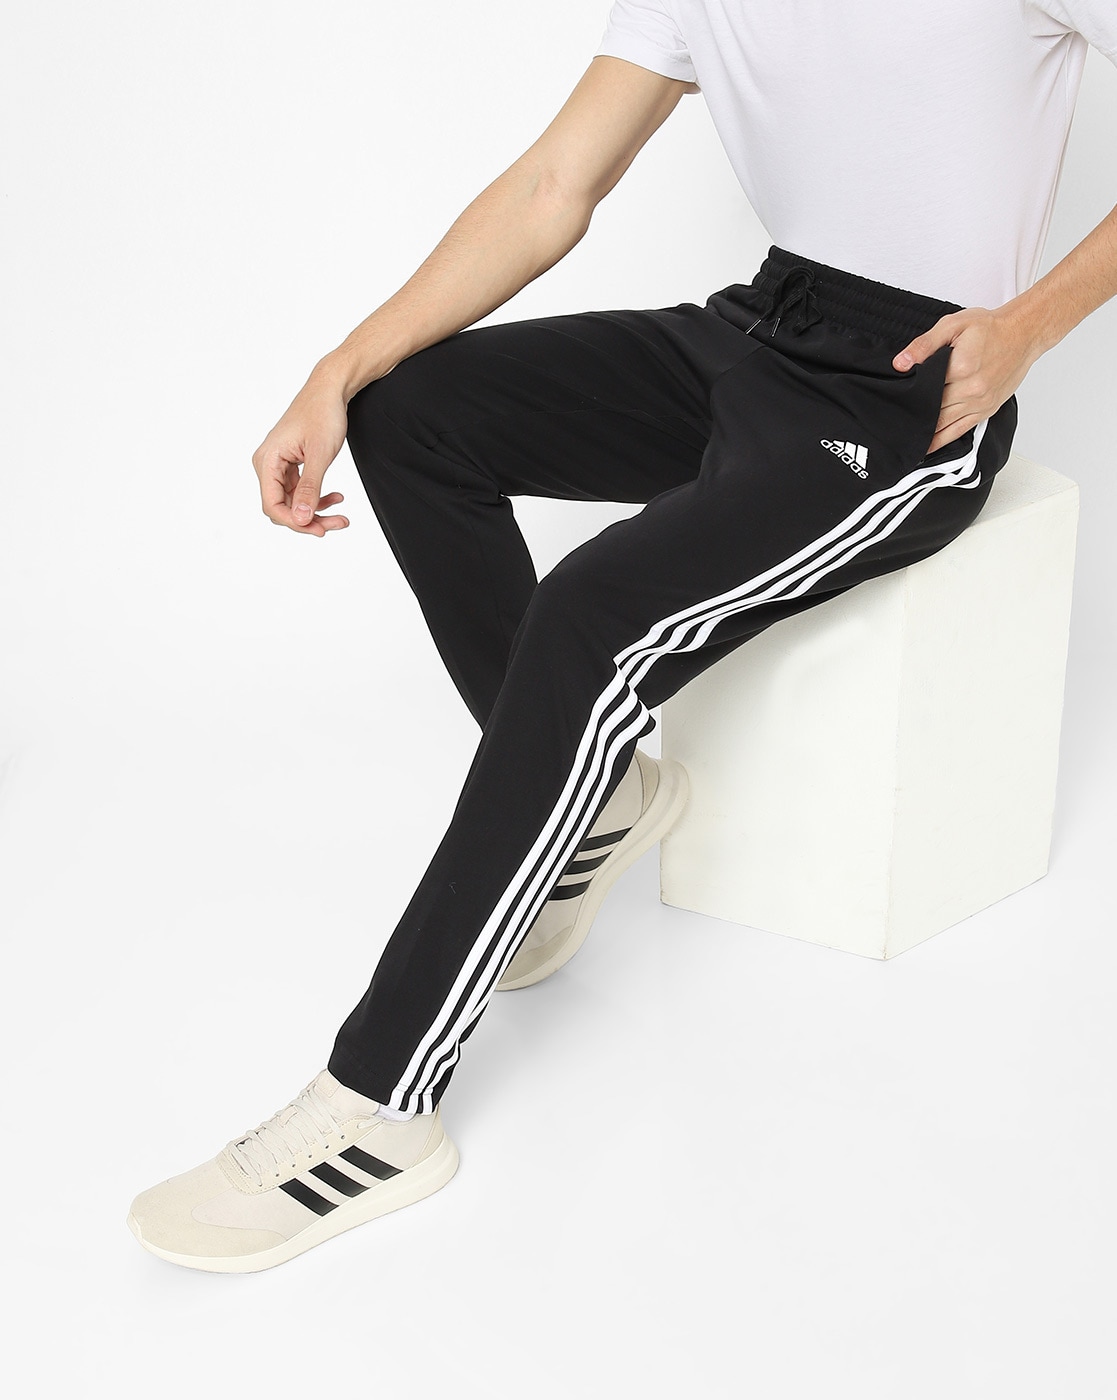 Shop SideStriped Track Pants for Men from latest collection at Forever 21   515193